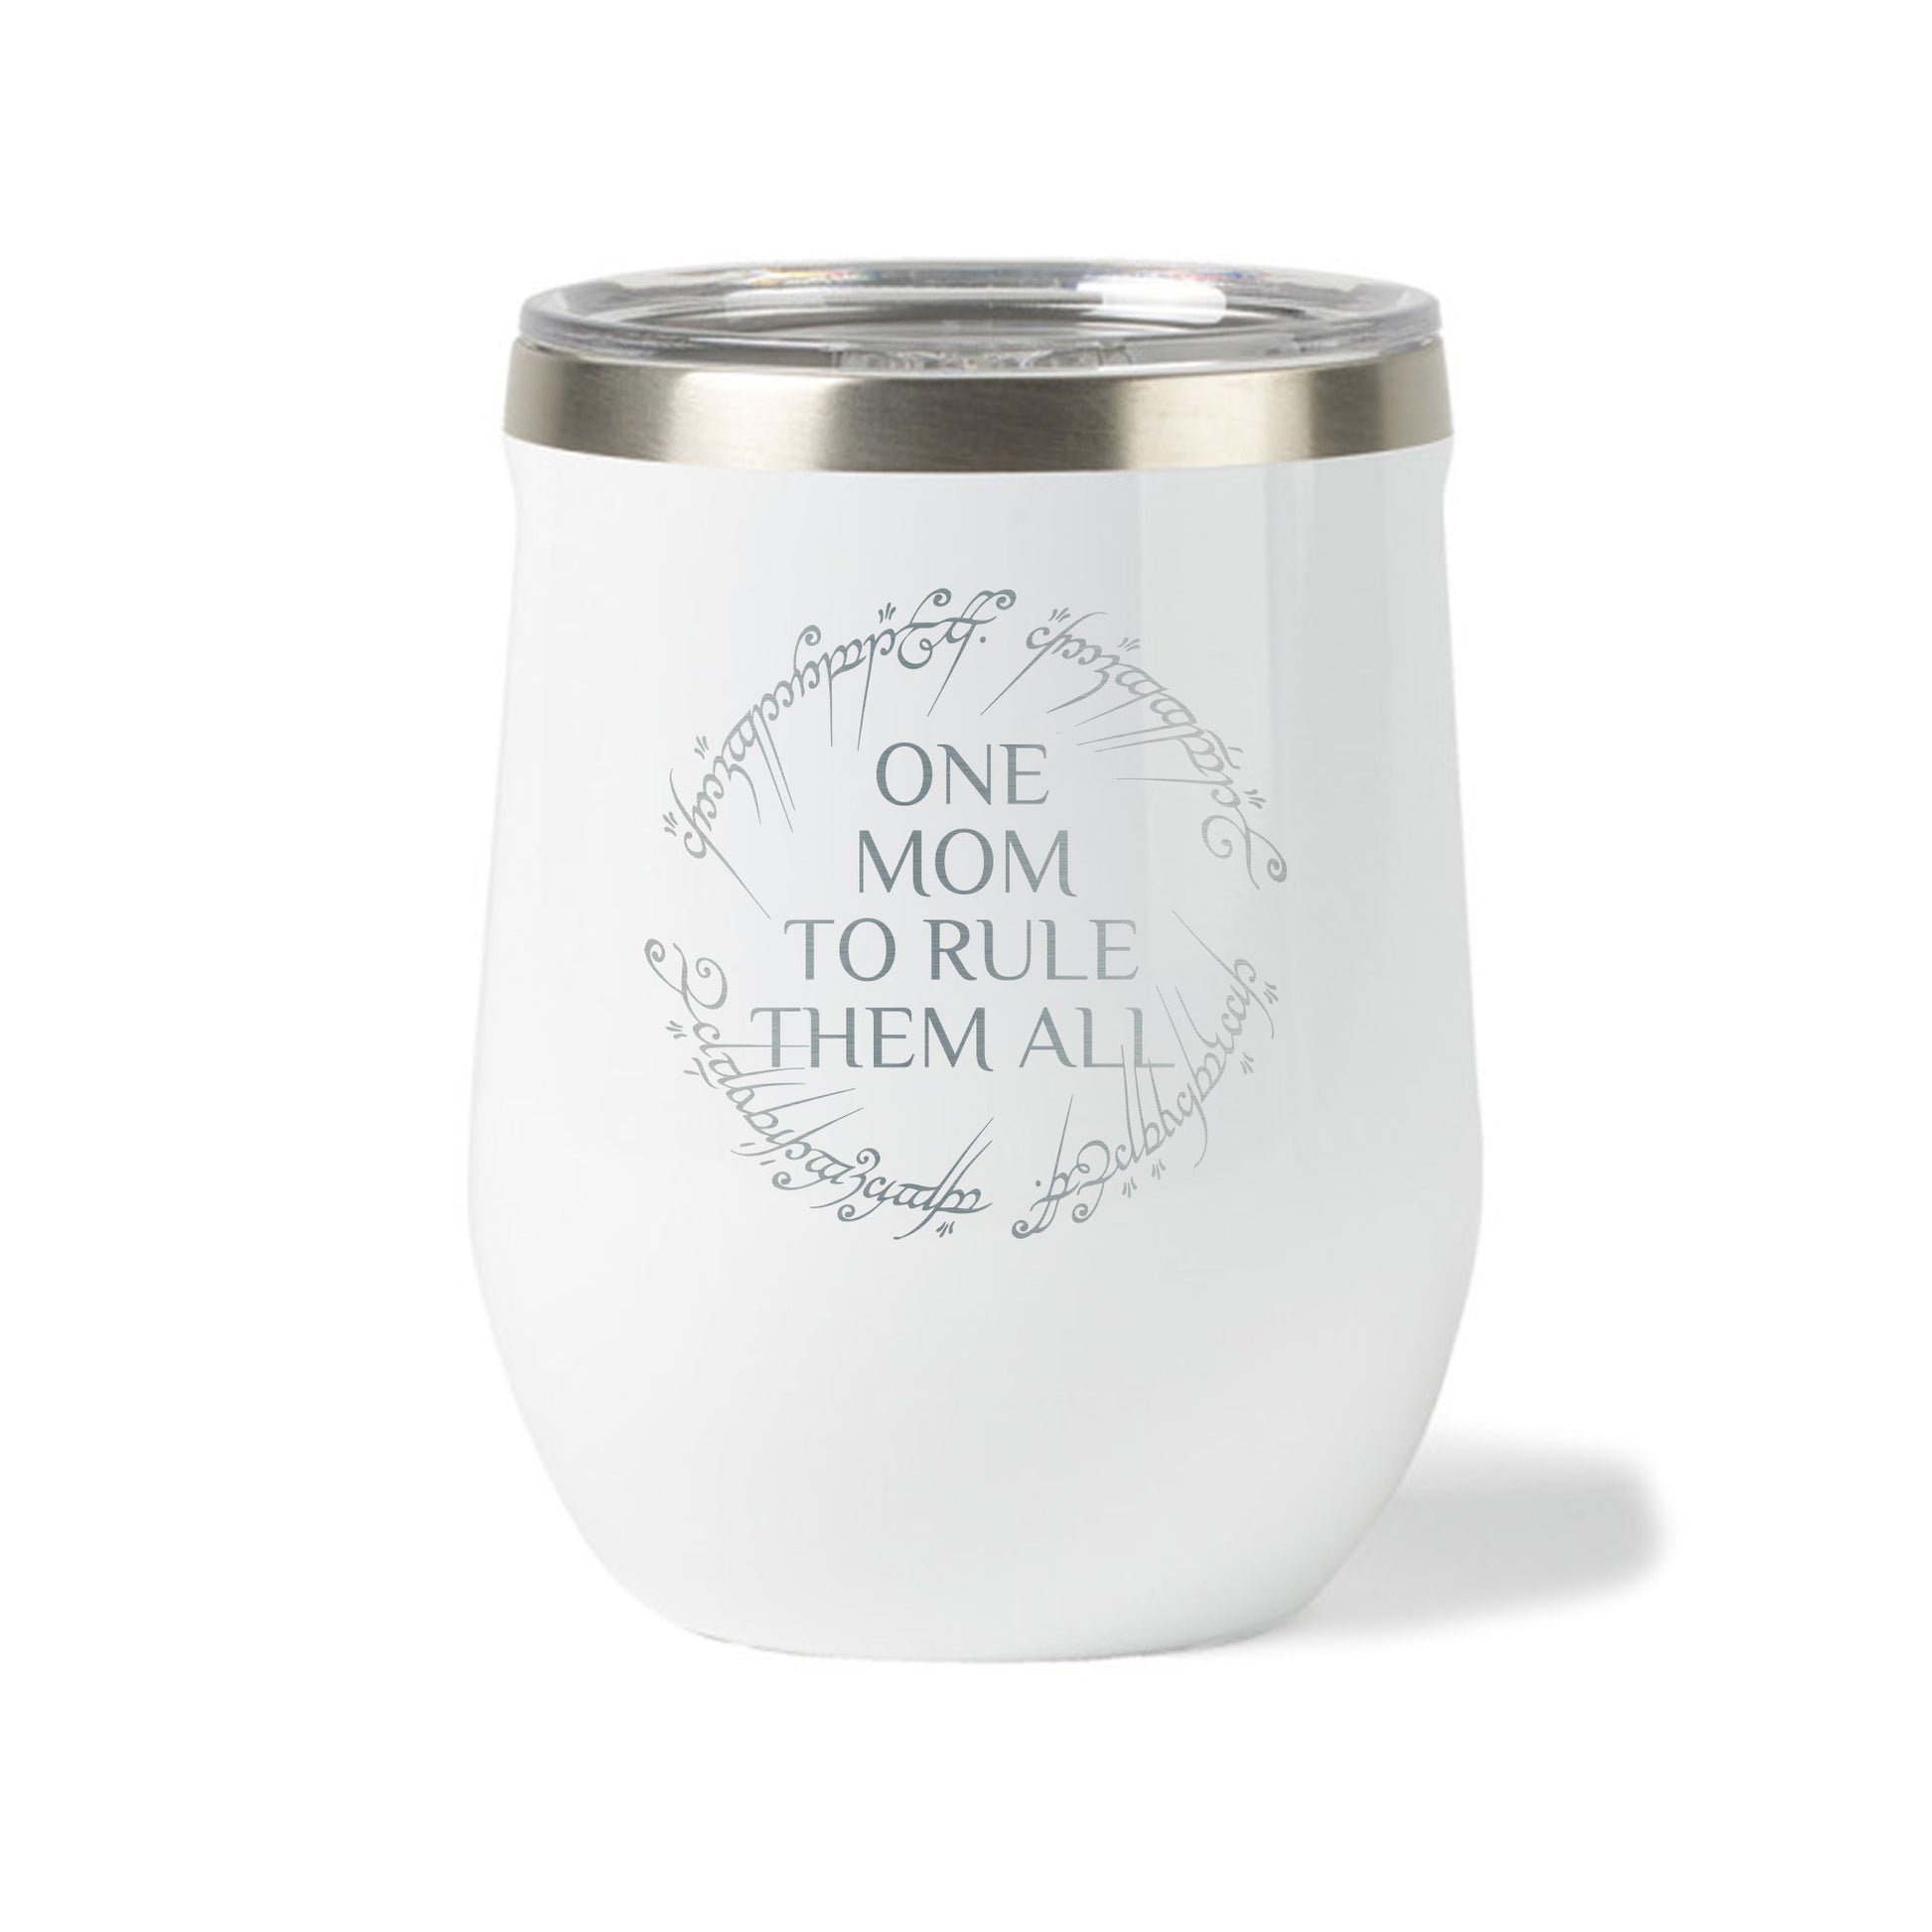 Personalized CORKCICLE® Stemless Wine Cup 12 oz - Etchified-CORKCICLE®-ETC-GMLN-100485-100485-100